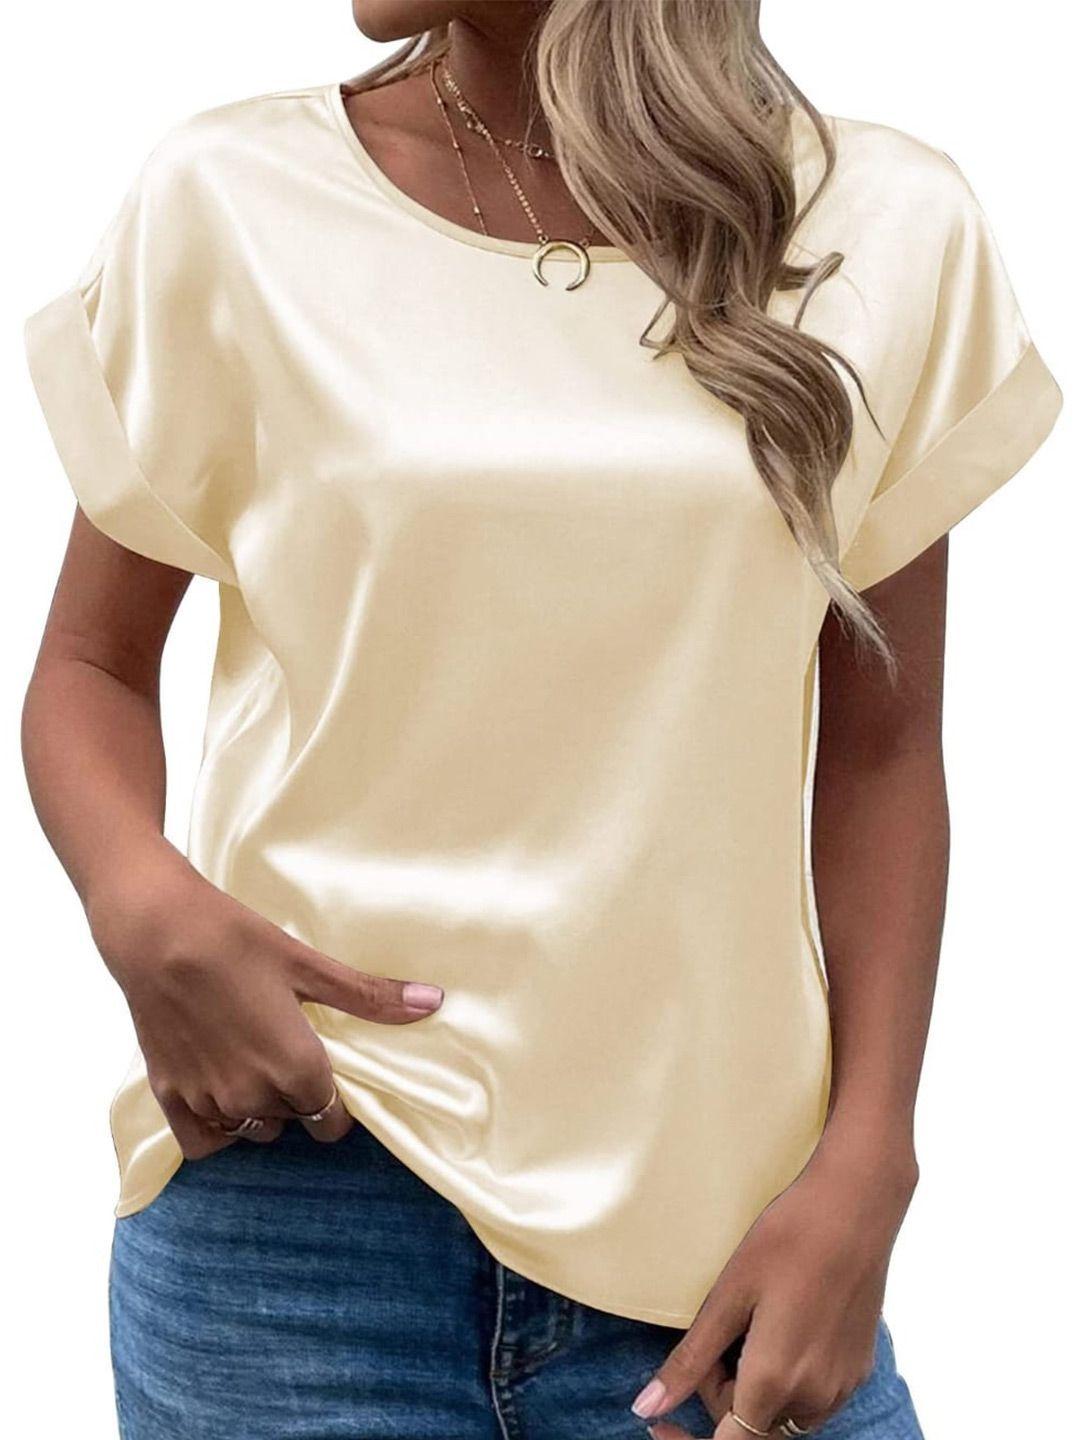 stylecast x kpop cream round neck extended sleeves top